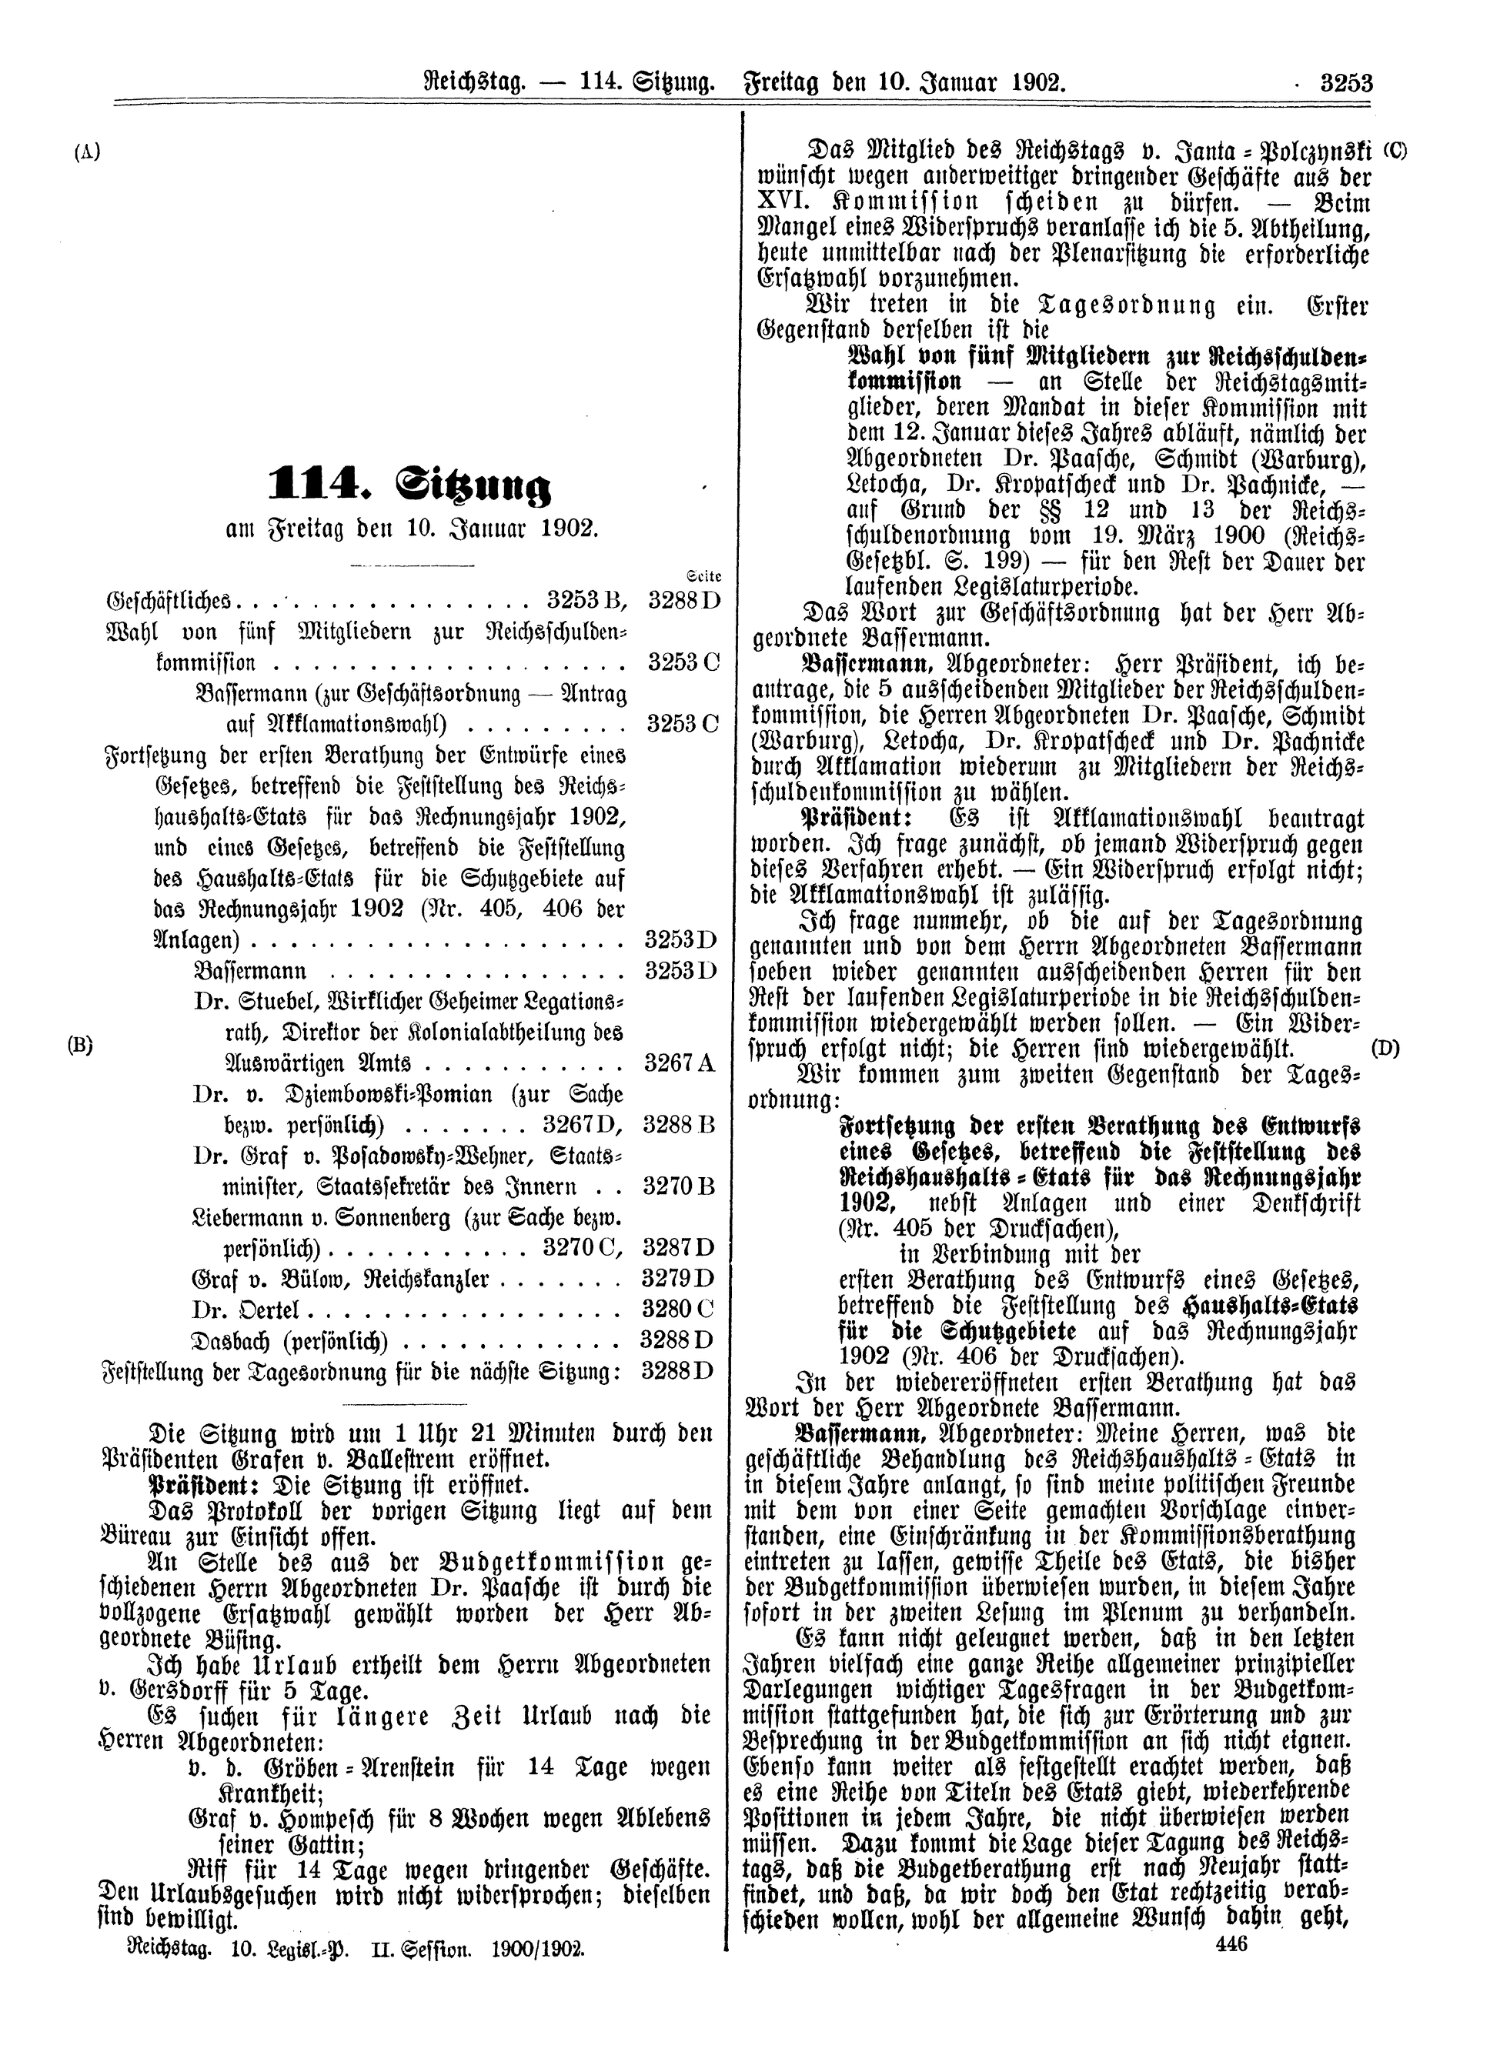 Scan of page 3253